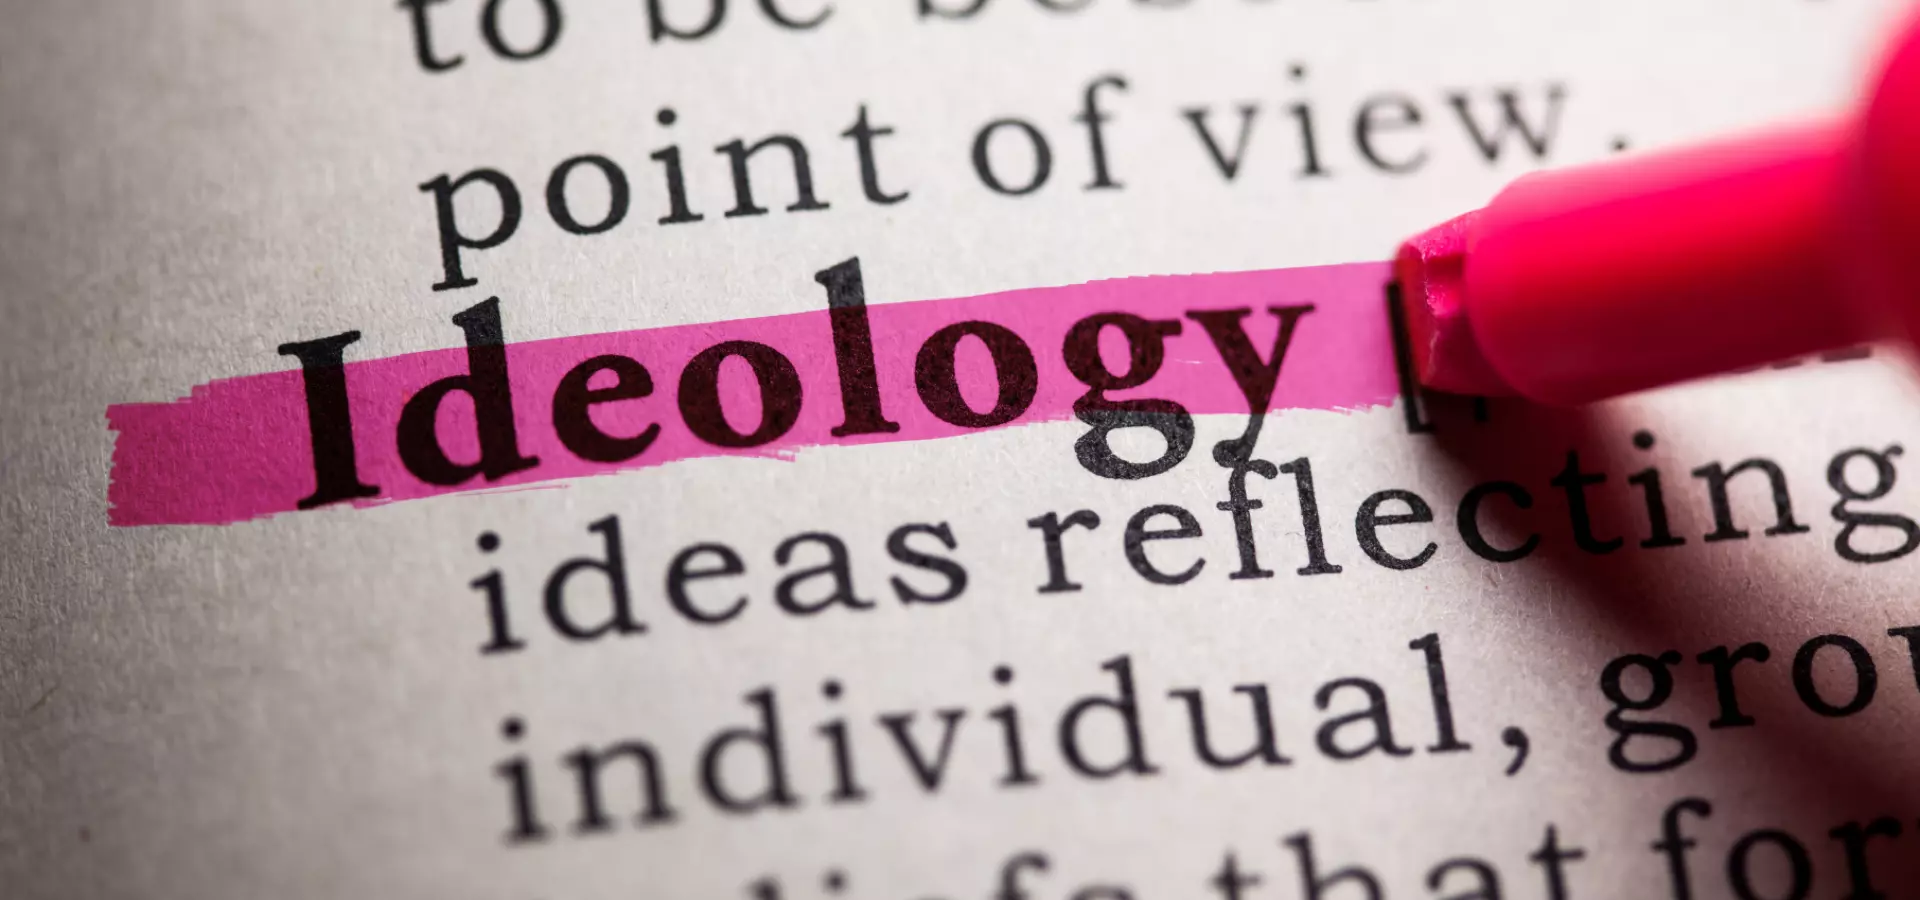 Dictionary entry with the word 'ideology' in bold and highlighted in pink